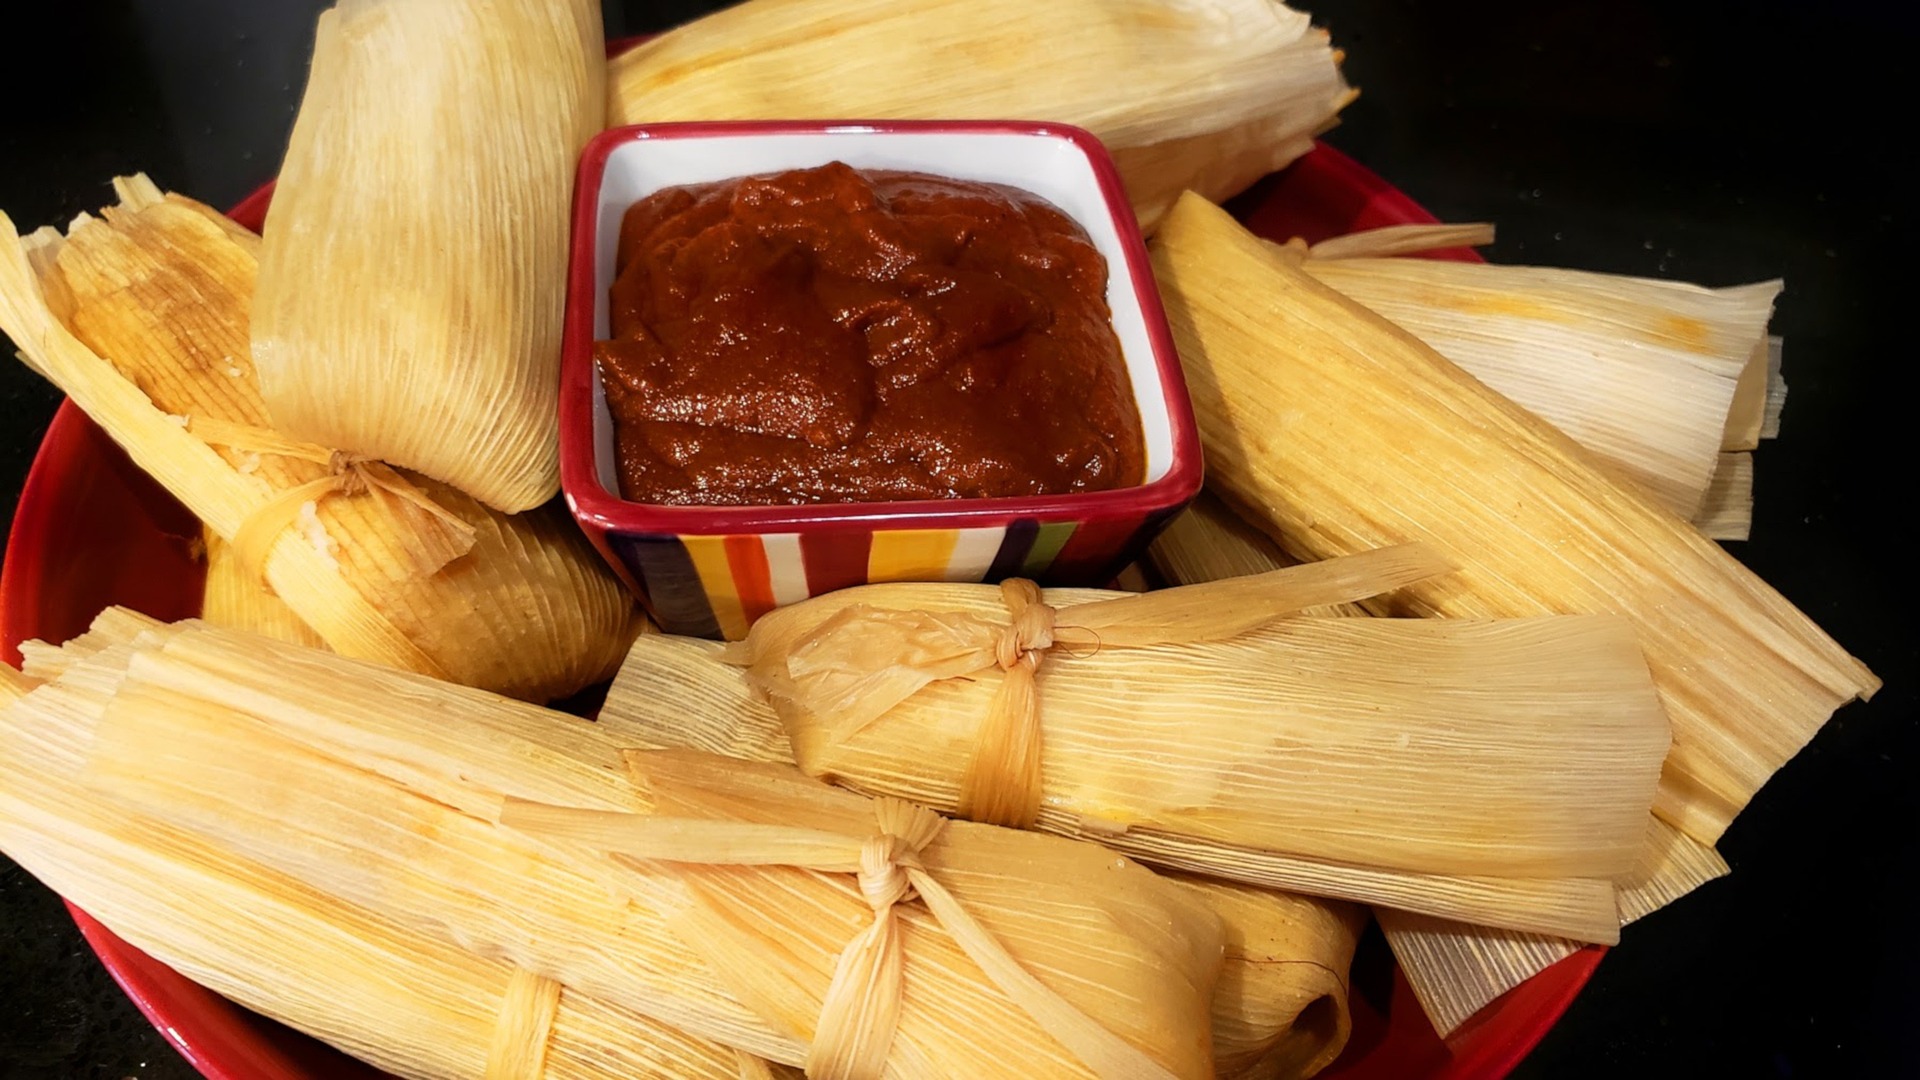 Tamales are some of the most famous Christmas traditions in New Mexico.